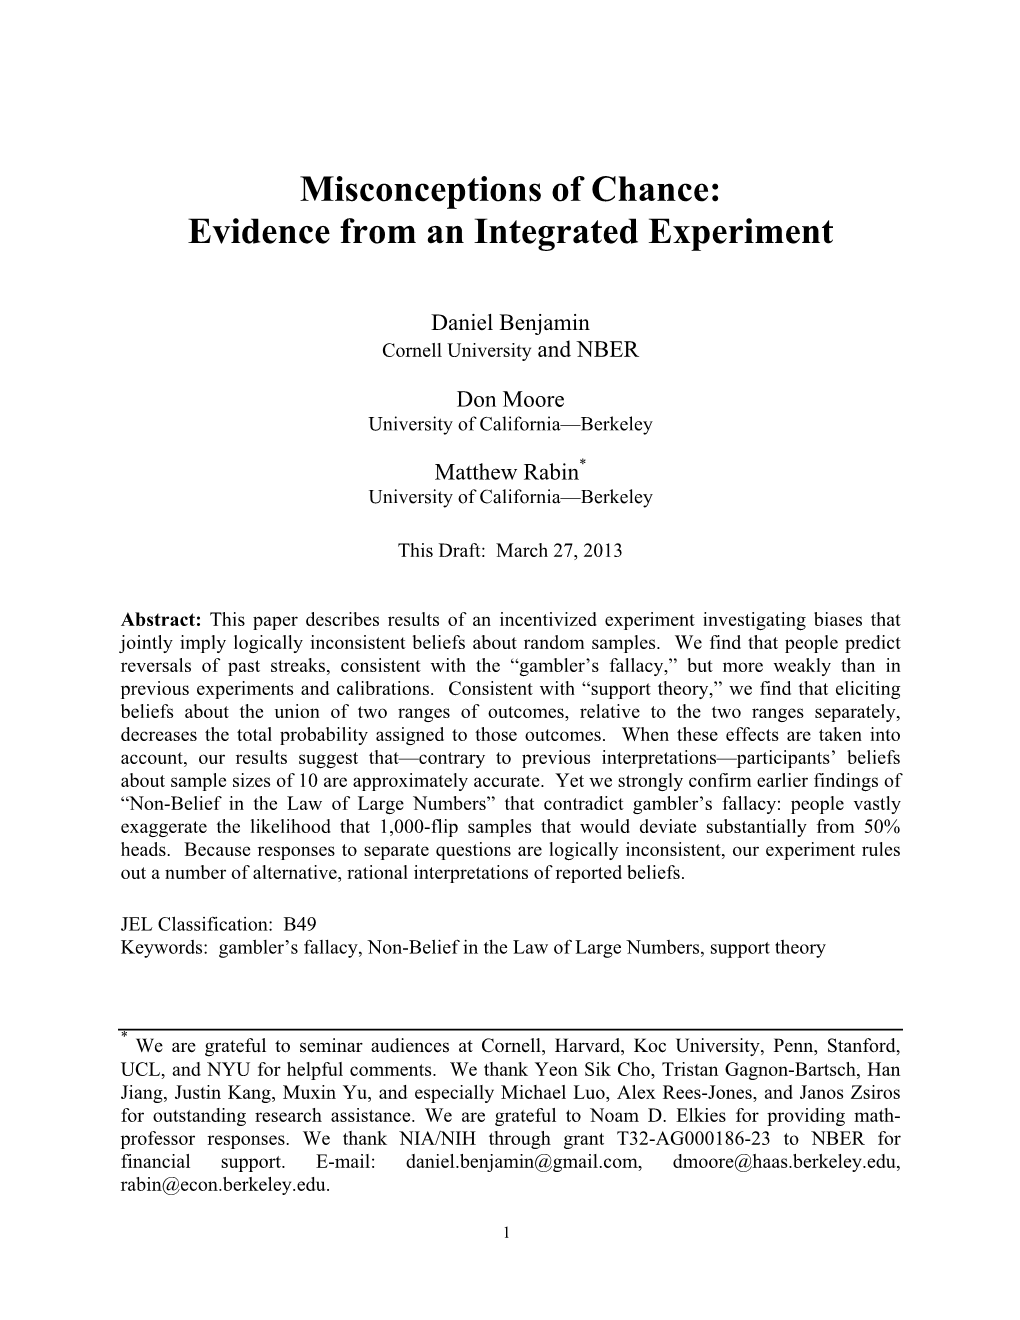 Misconceptions of Chance: Evidence from an Integrated Experiment